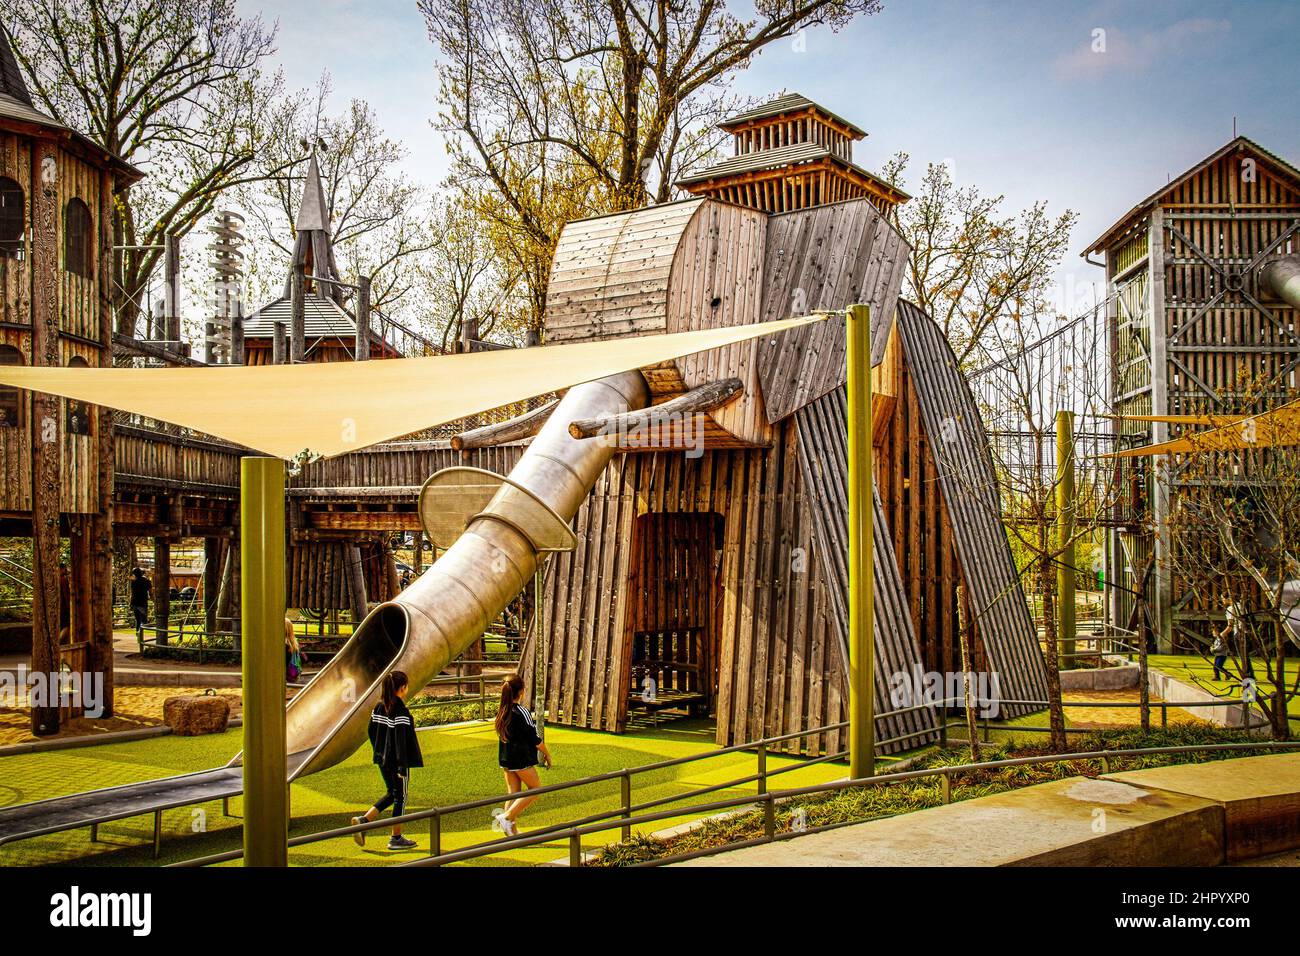 2019 04 06 Tulsa OK USA - Wooden Elephant Climbing castle with slide for trunk and sail awning with children playing in Springtime at The Gathering Pl Stock Photo